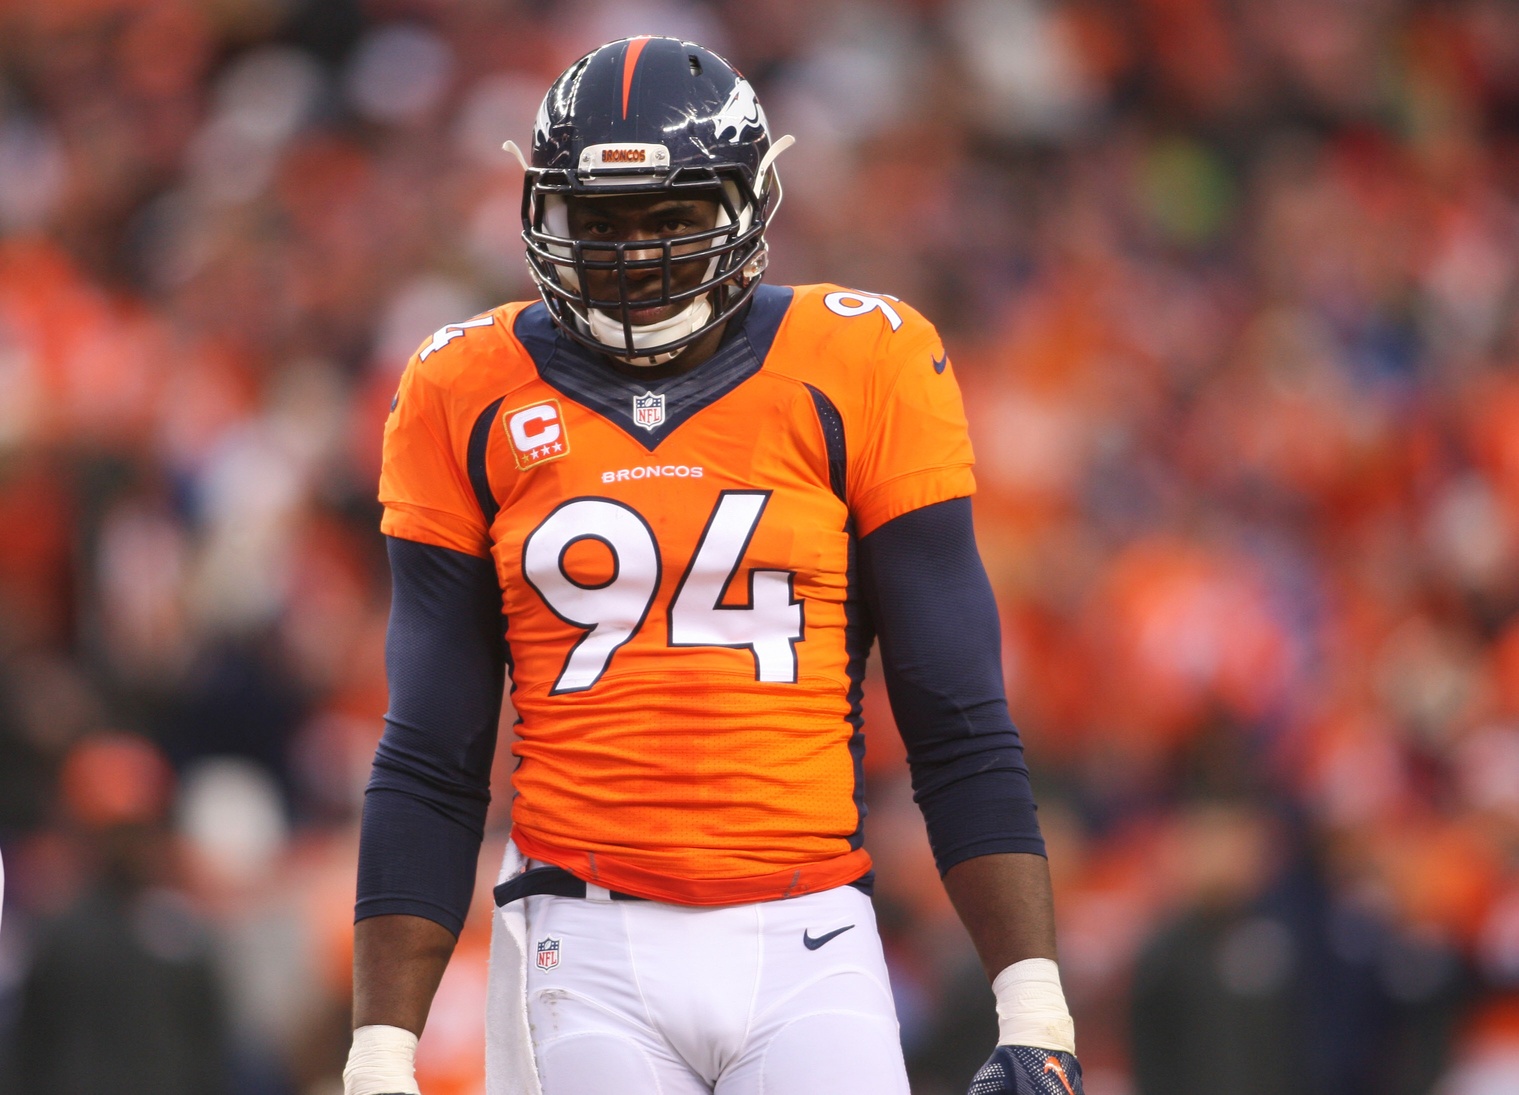 DeMarcus Ware on His Career "I've Got Many Years Left"